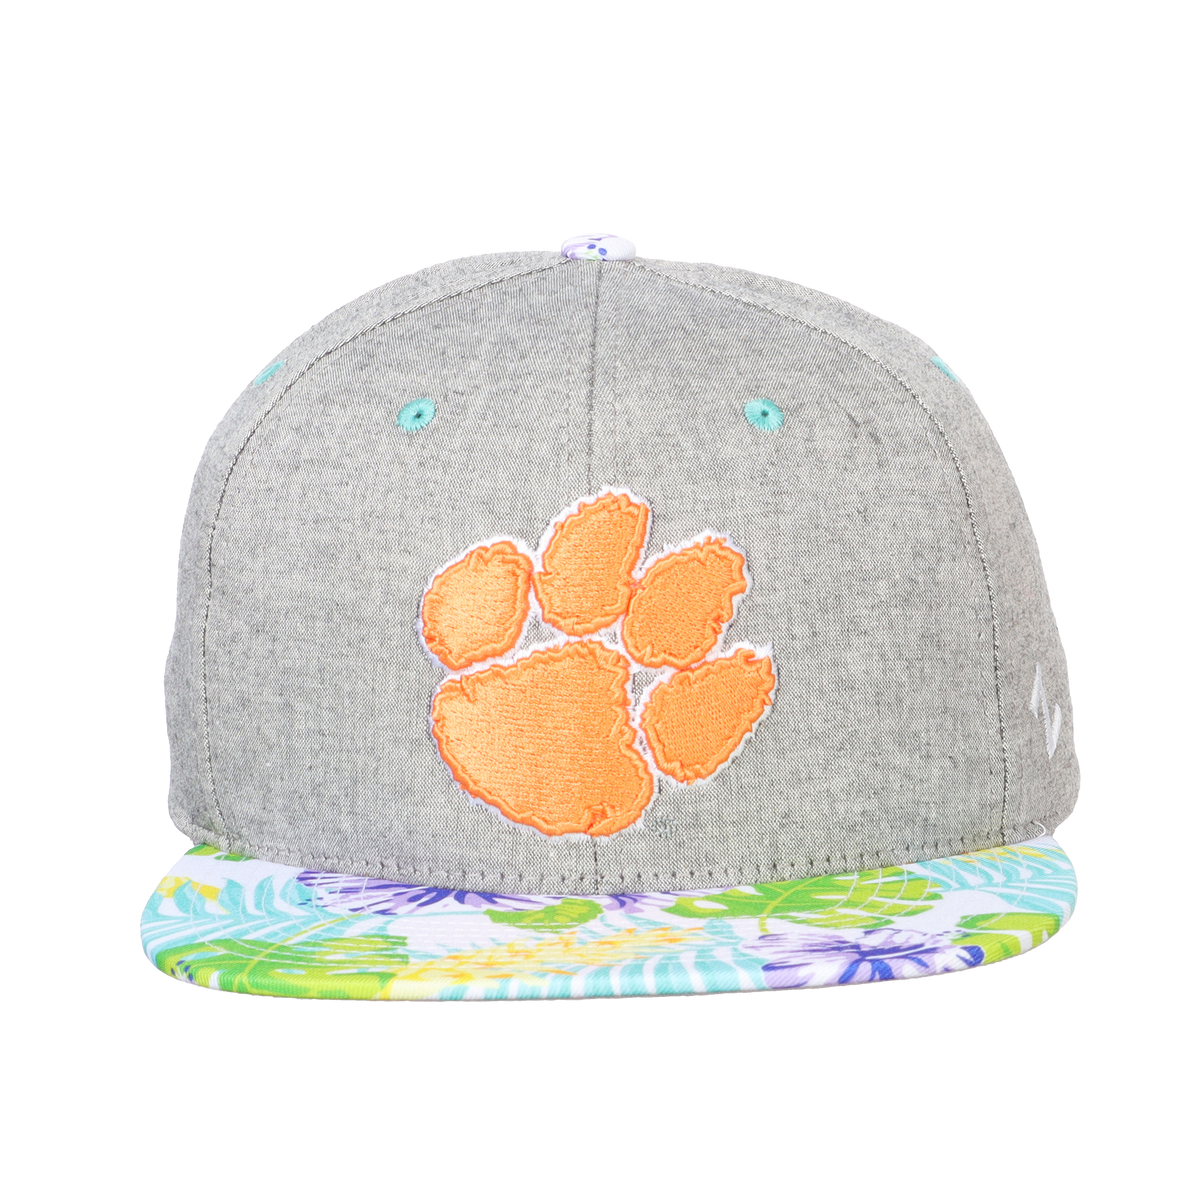 Punchbowl Flat Bill Snapback Adjustable Hat with Paw on front and Clemson on back